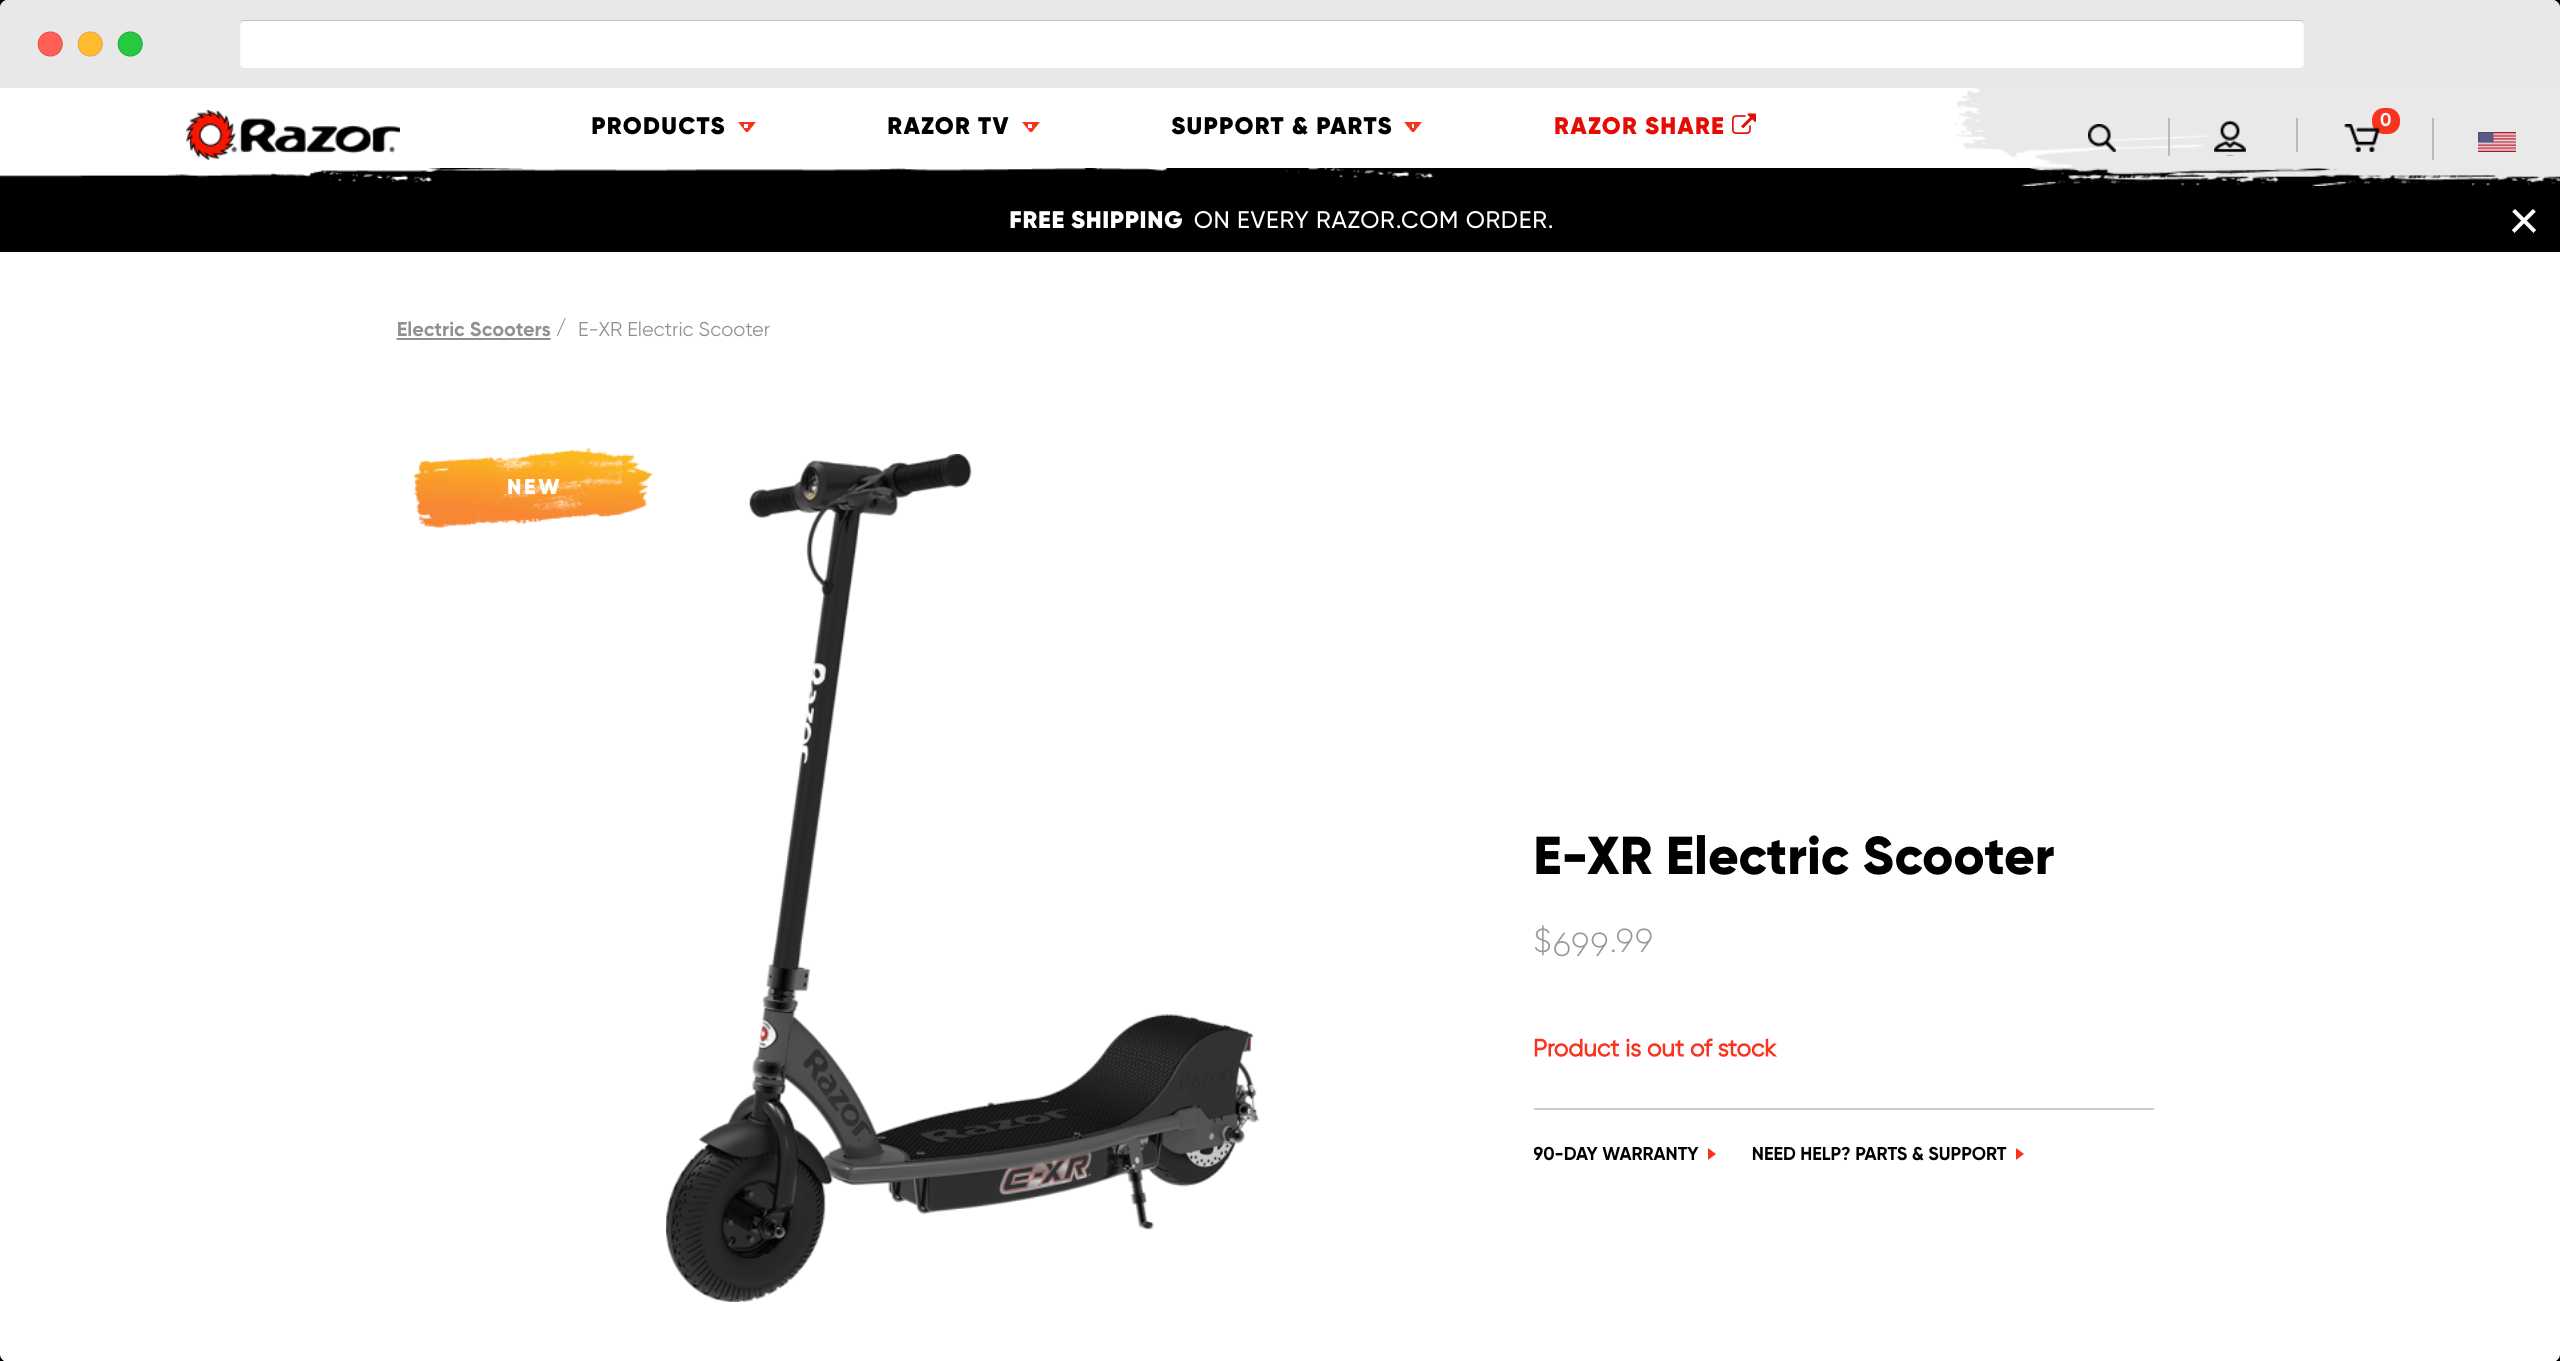 E-XR Electric Scooter Page